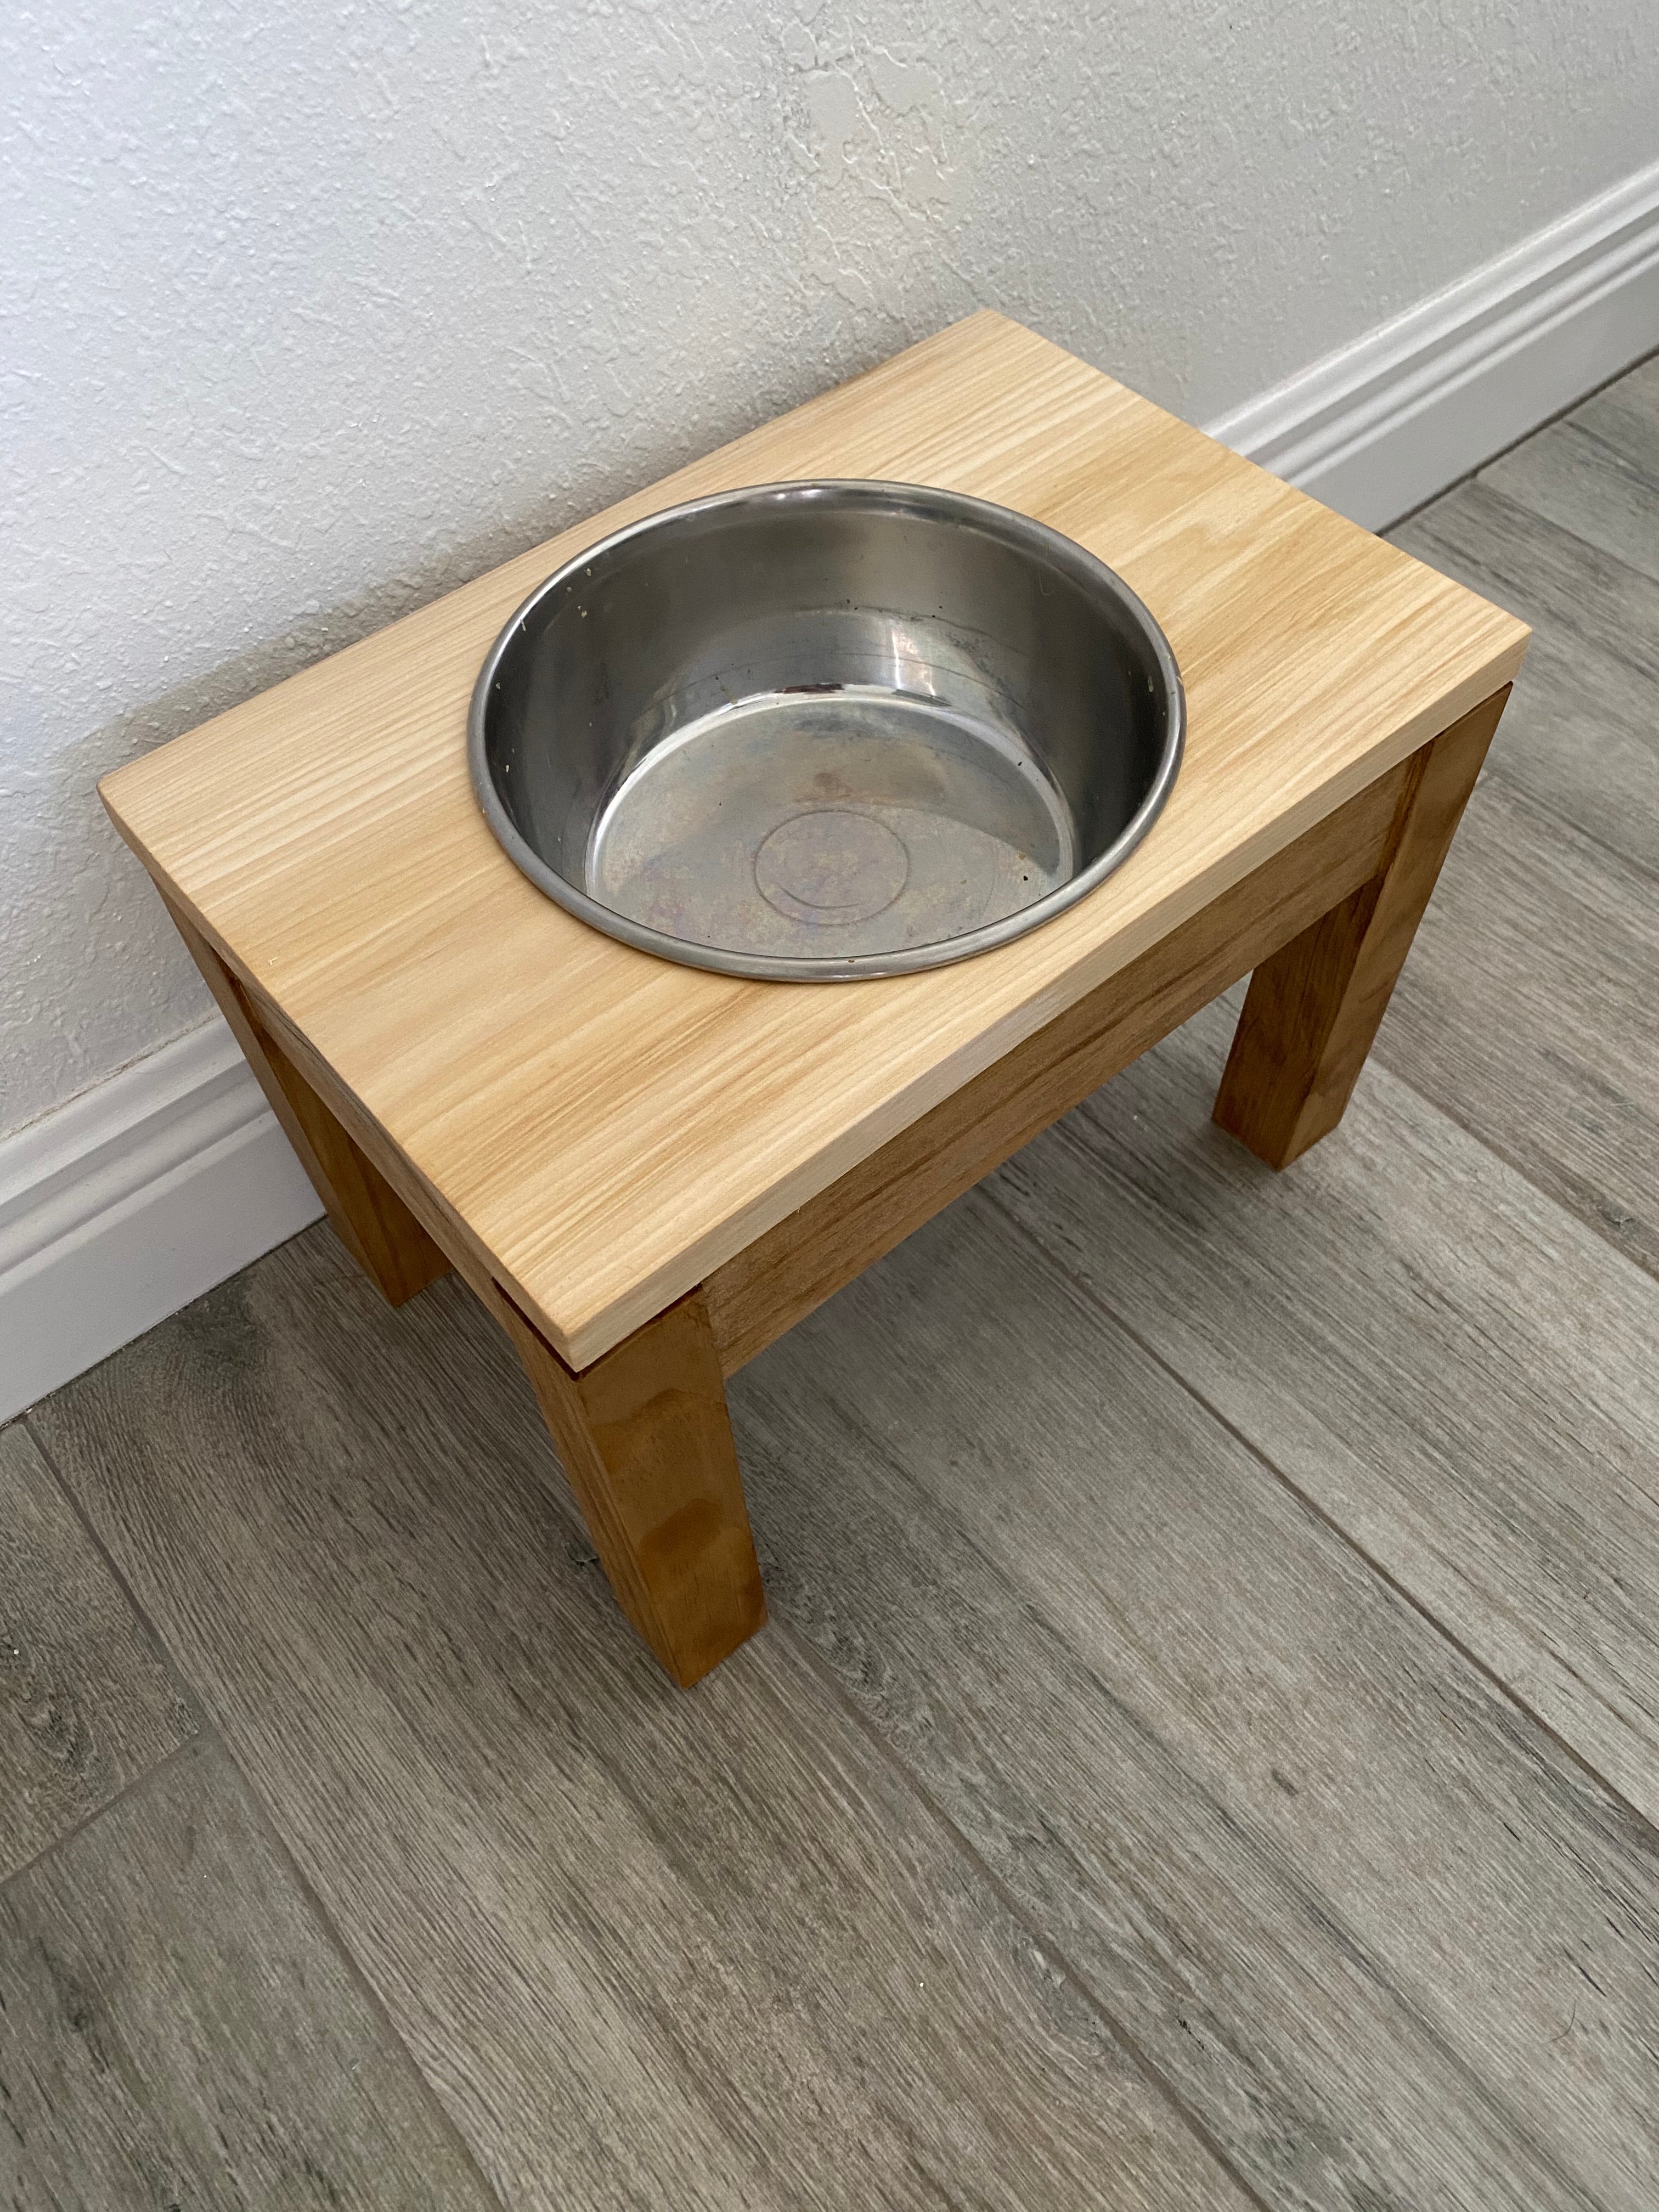 Raised Resin Dog Bowl Stands – Sandia Mountain Woodworks